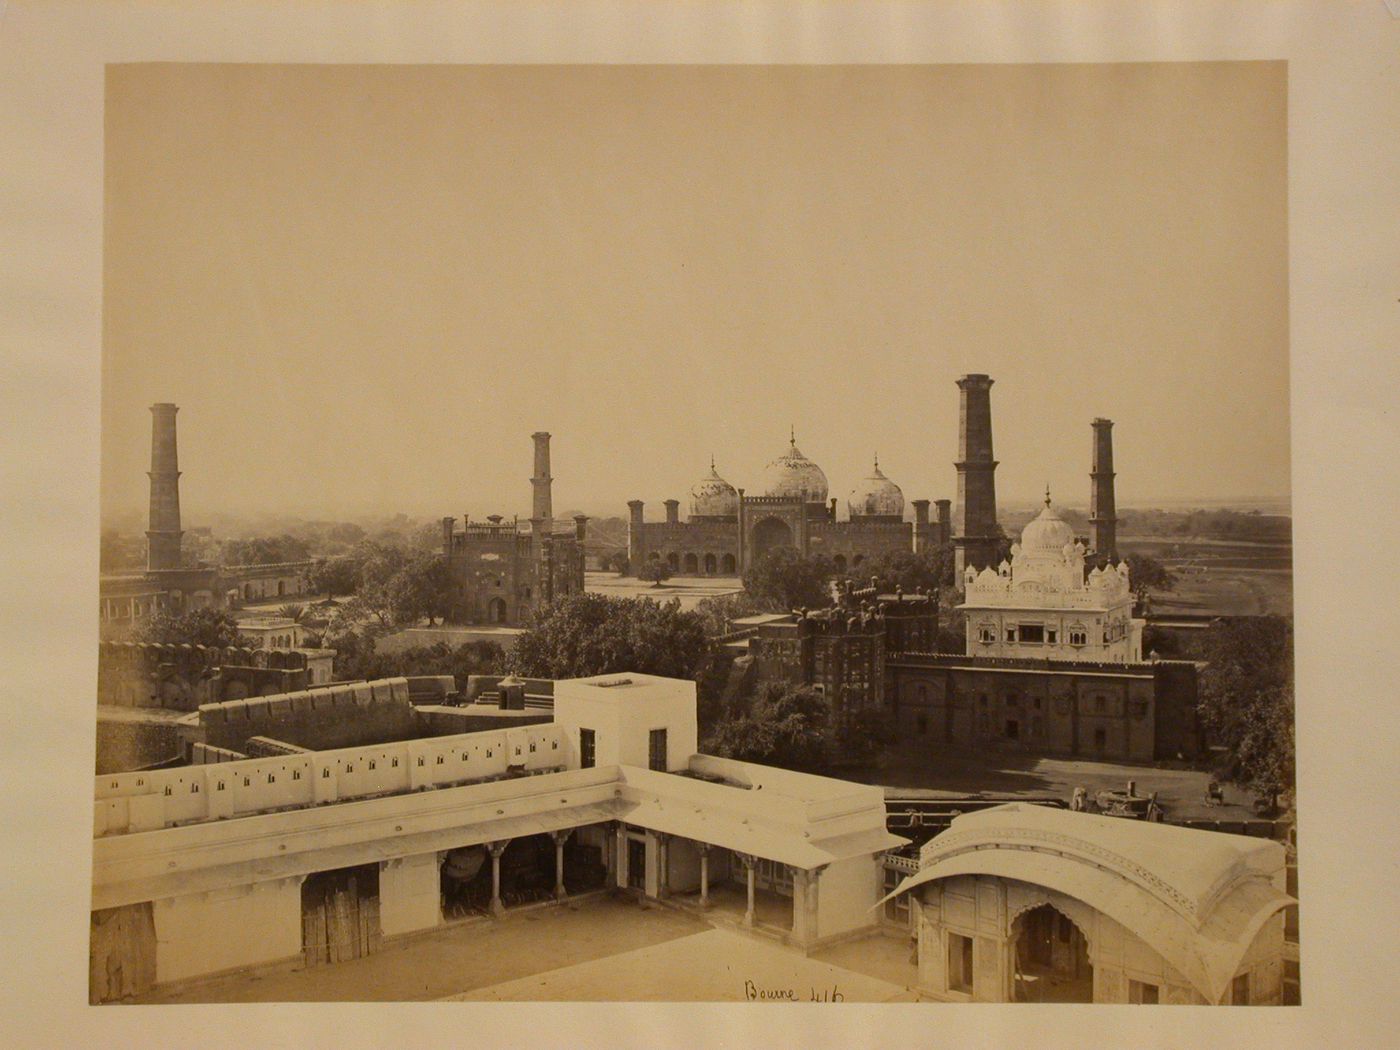 View of palace buildings with Badshahi Masjid in the background, Lahore Fort, Lahore, India (now in Pakistan)